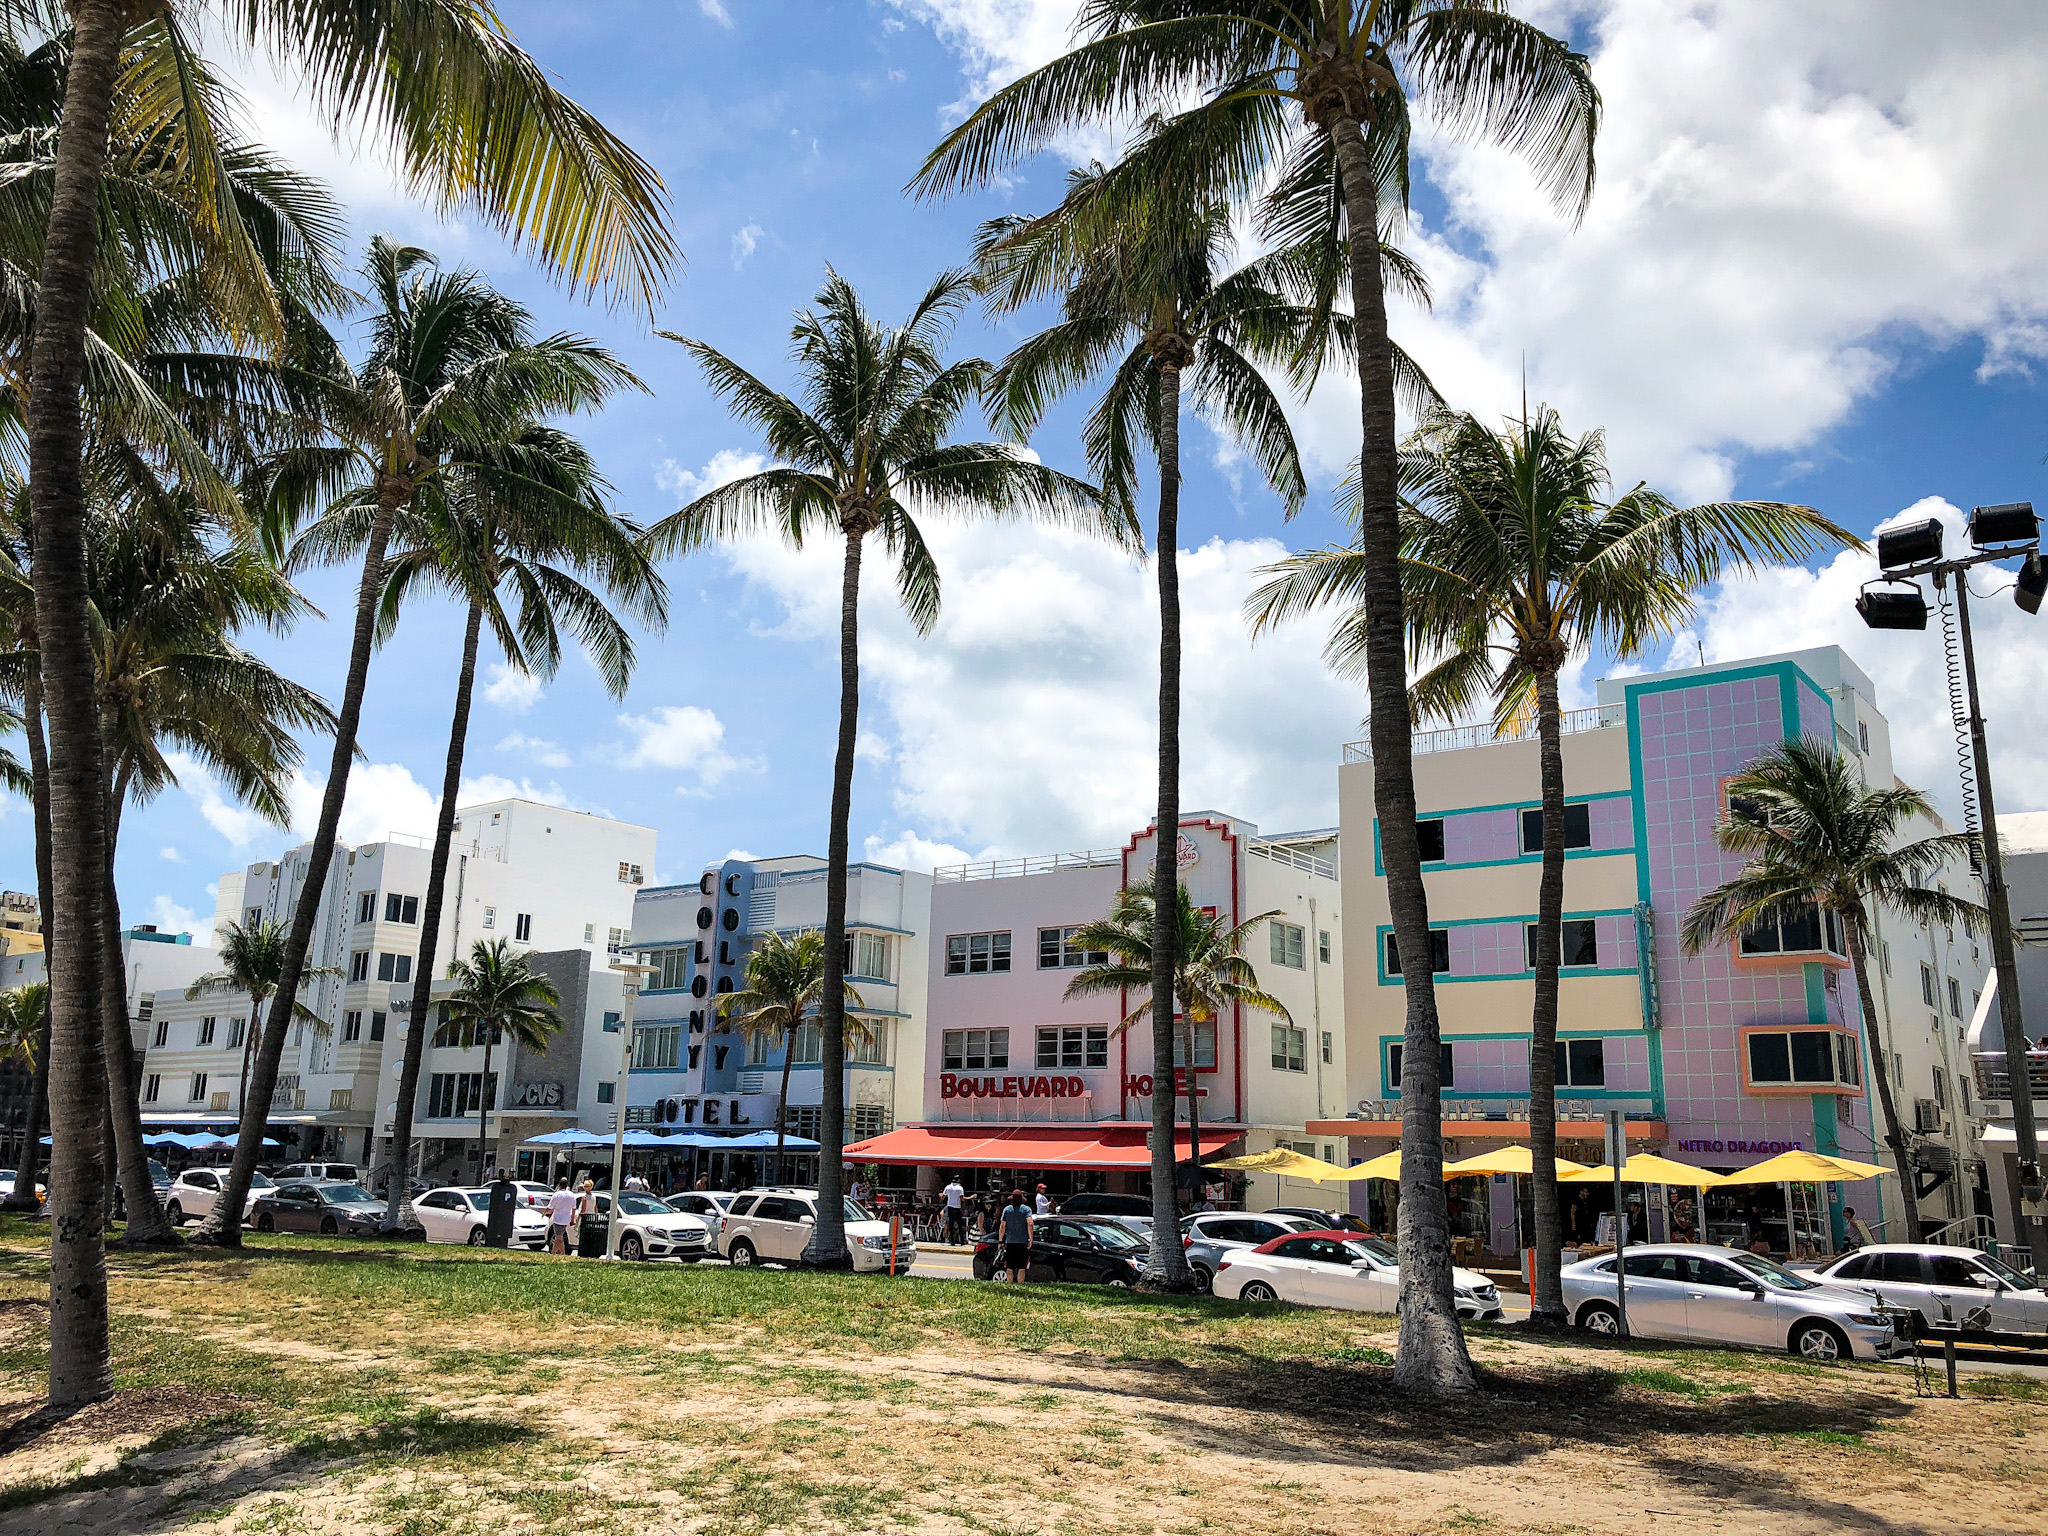 Palm trees and Art Deco buildings in Miami Beach